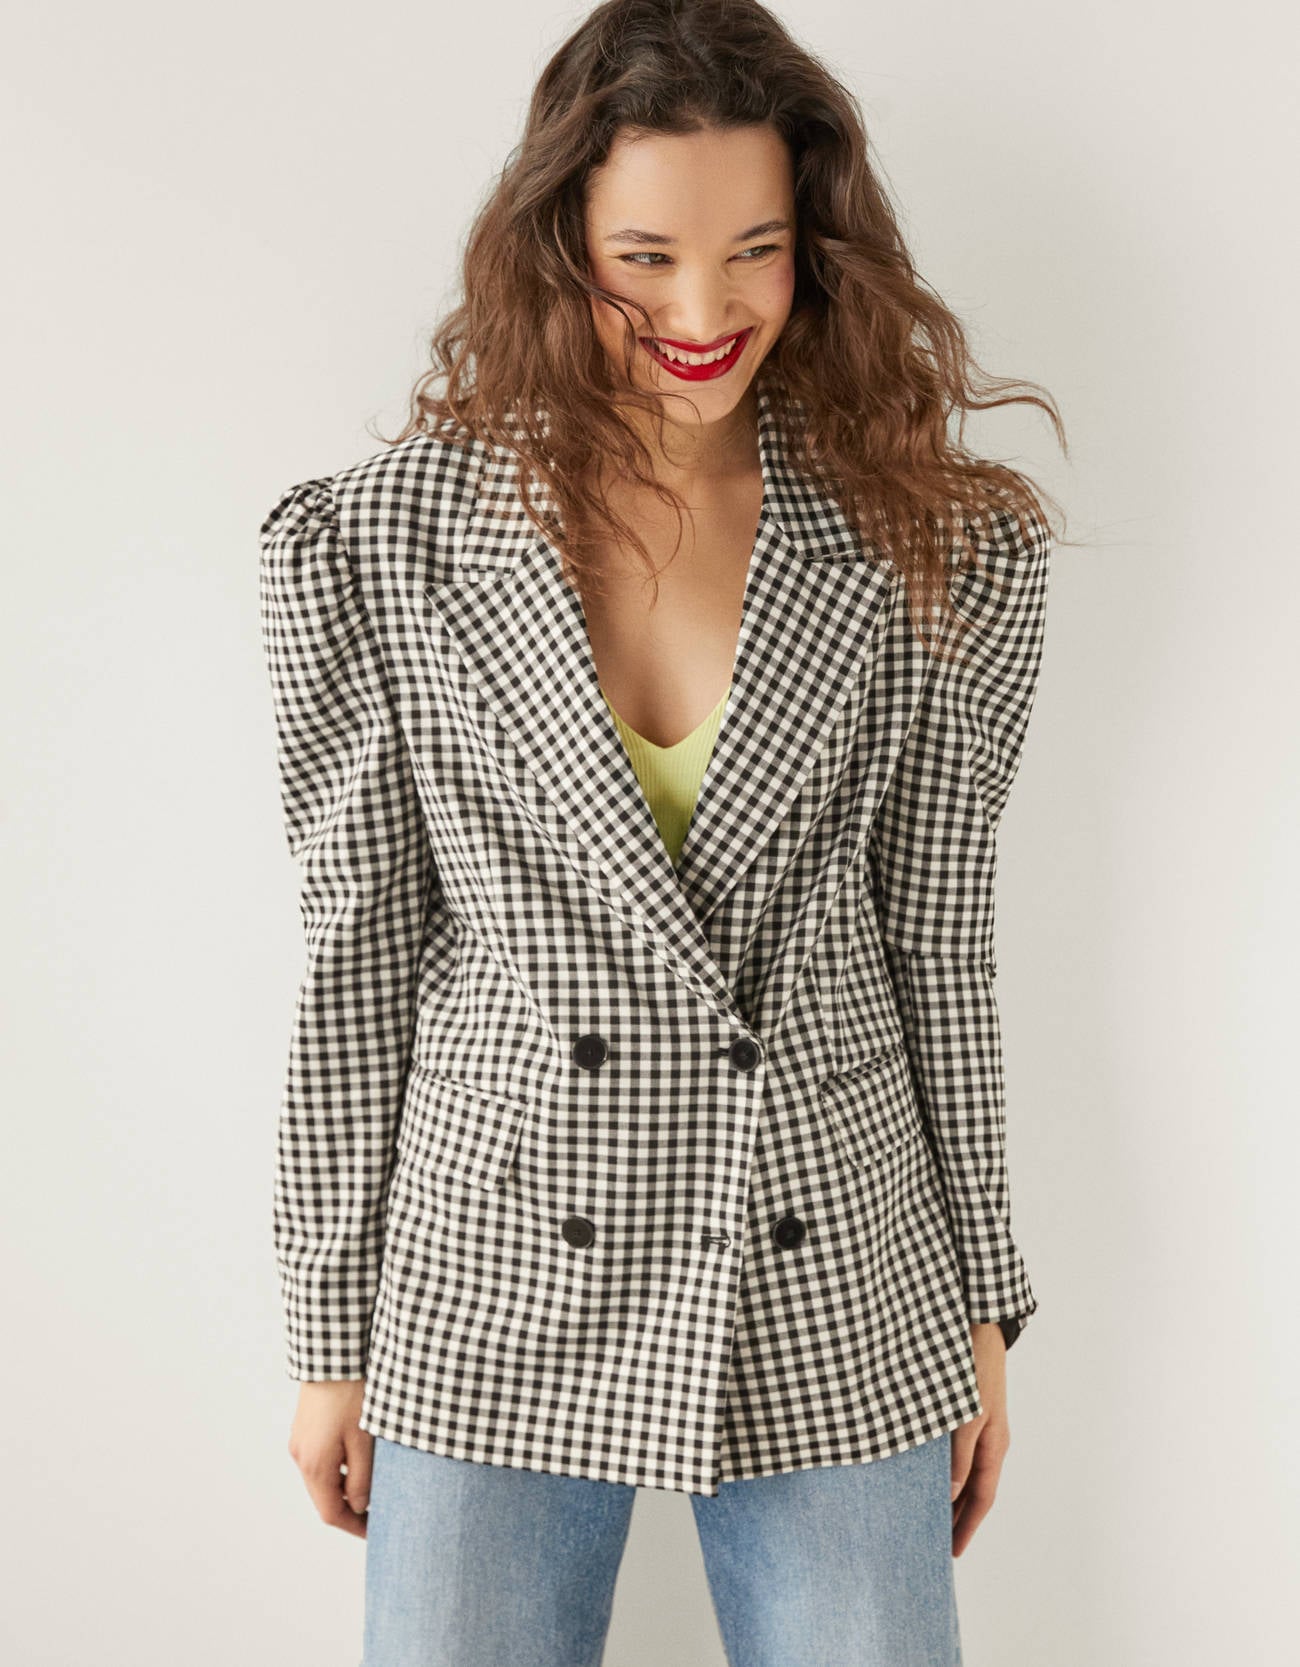 Bershka Blazer With Gingham Print | From Minimal to Feminine and Sporty, 42 Under-$100 Pieces We're For Spring | POPSUGAR Fashion Photo 7